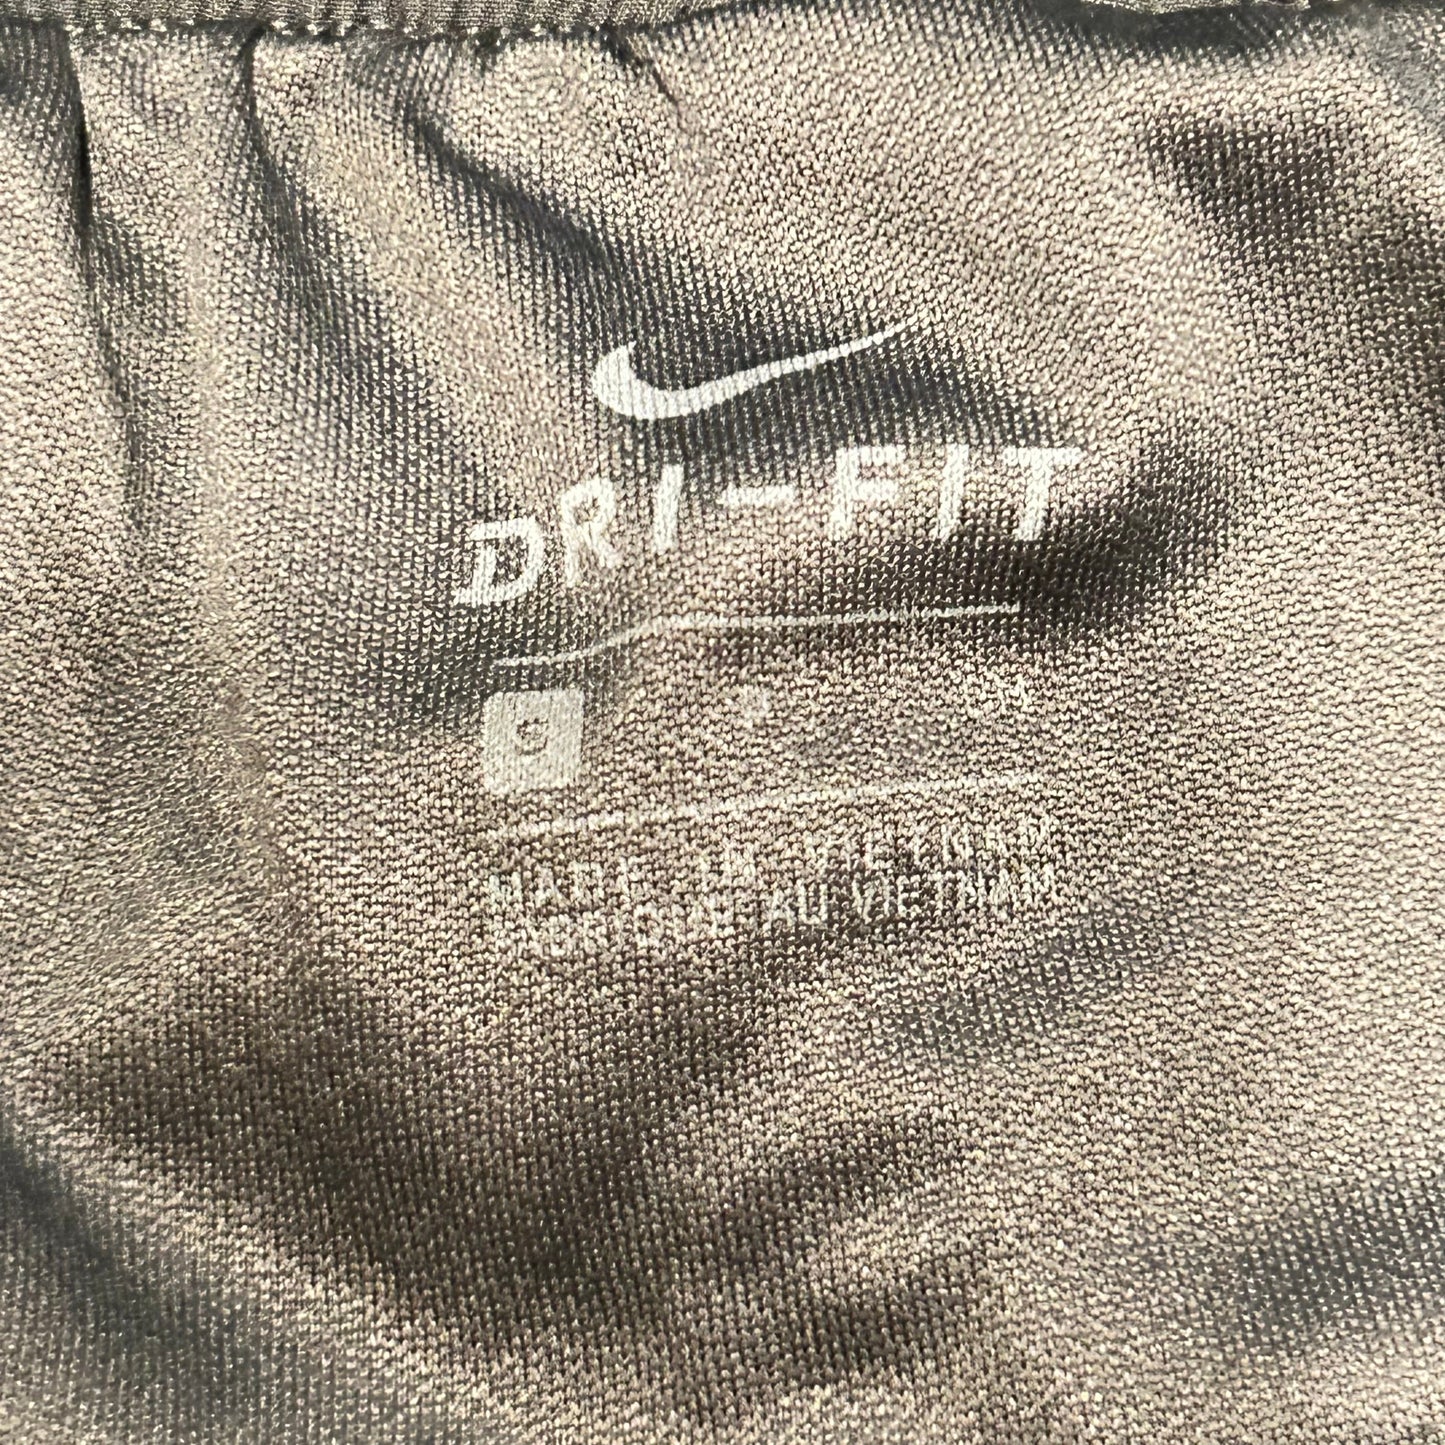 Grey Athletic Shorts By Nike Apparel, Size: S